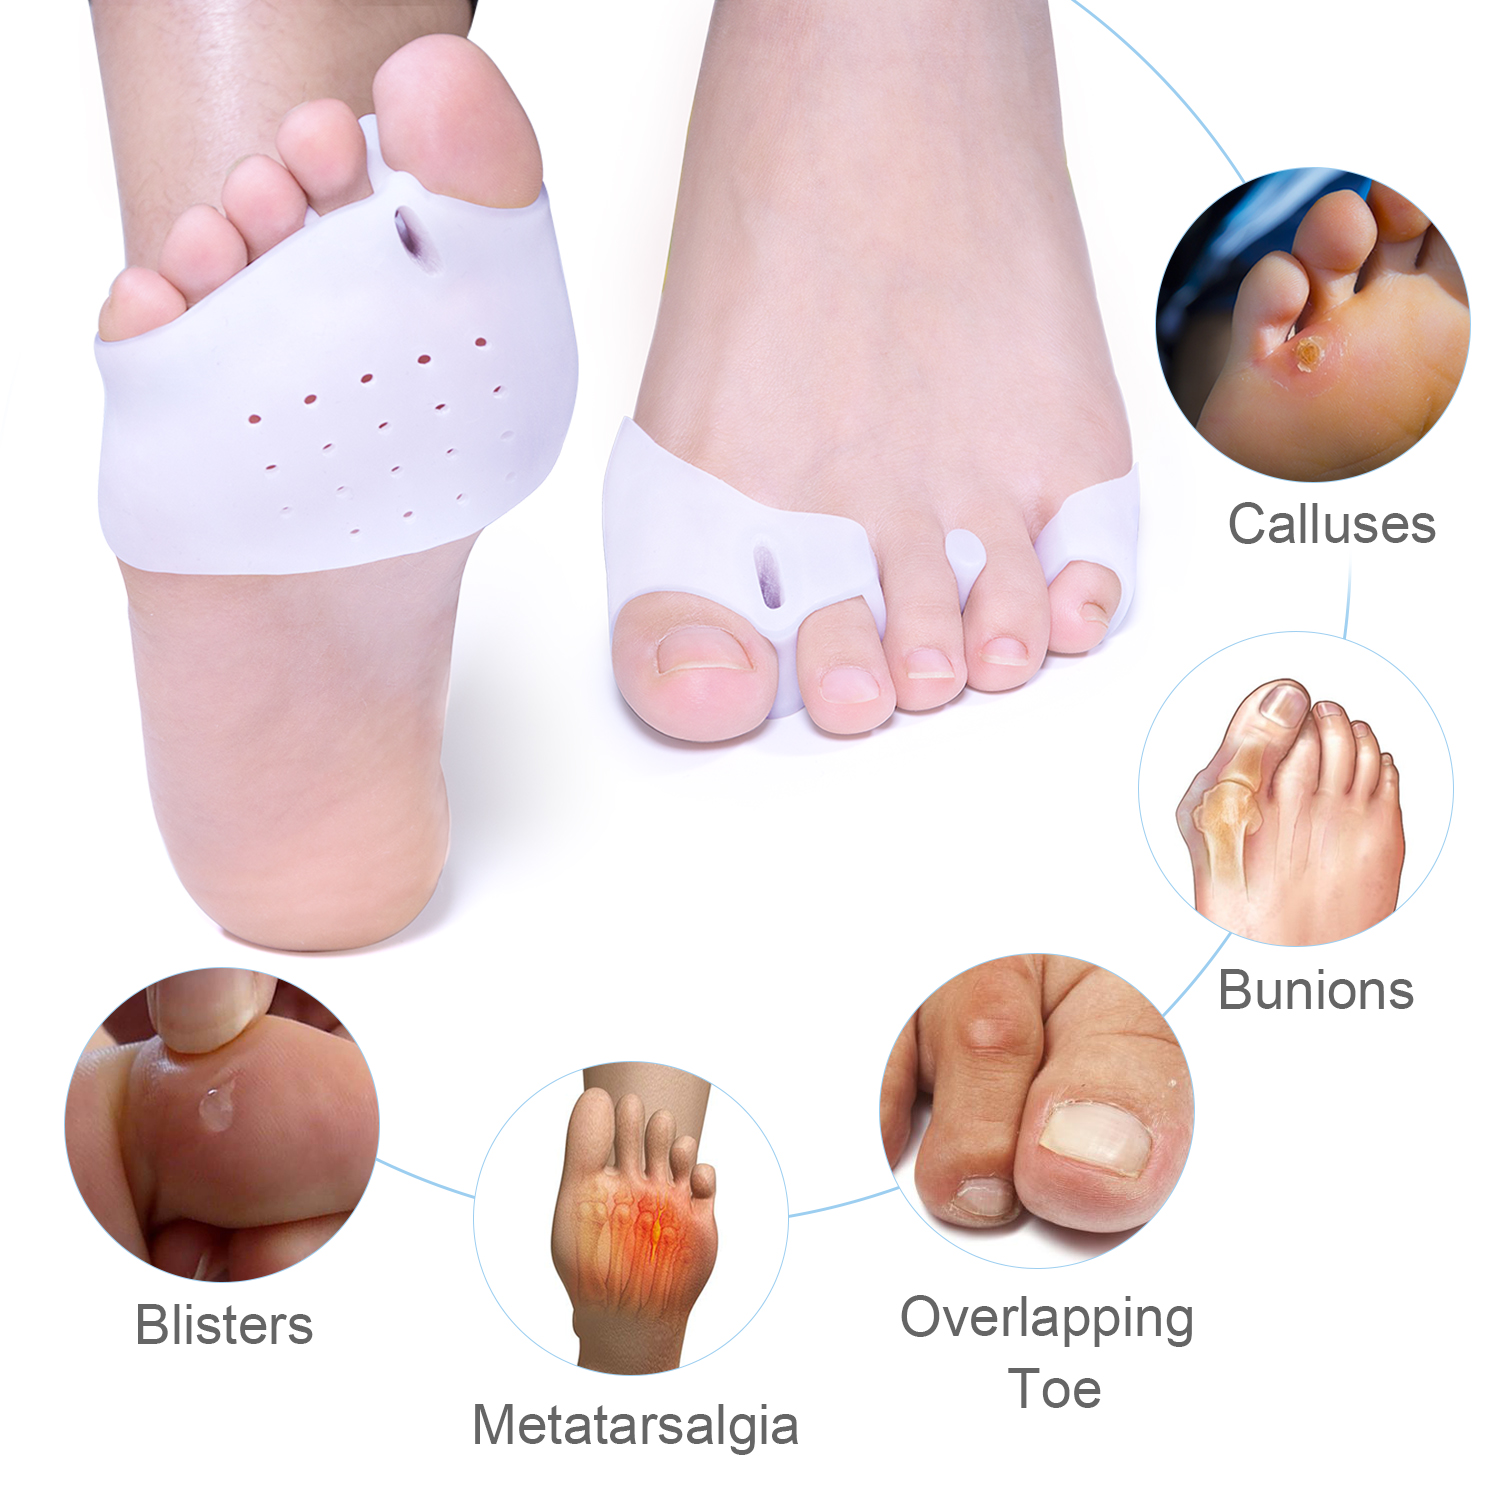 2pcs Forefoot Pads Spreader For Bunion Corns Overlapping Toe Separator Ball of Foot Cushions Hallux Valgus Foot Care C1727